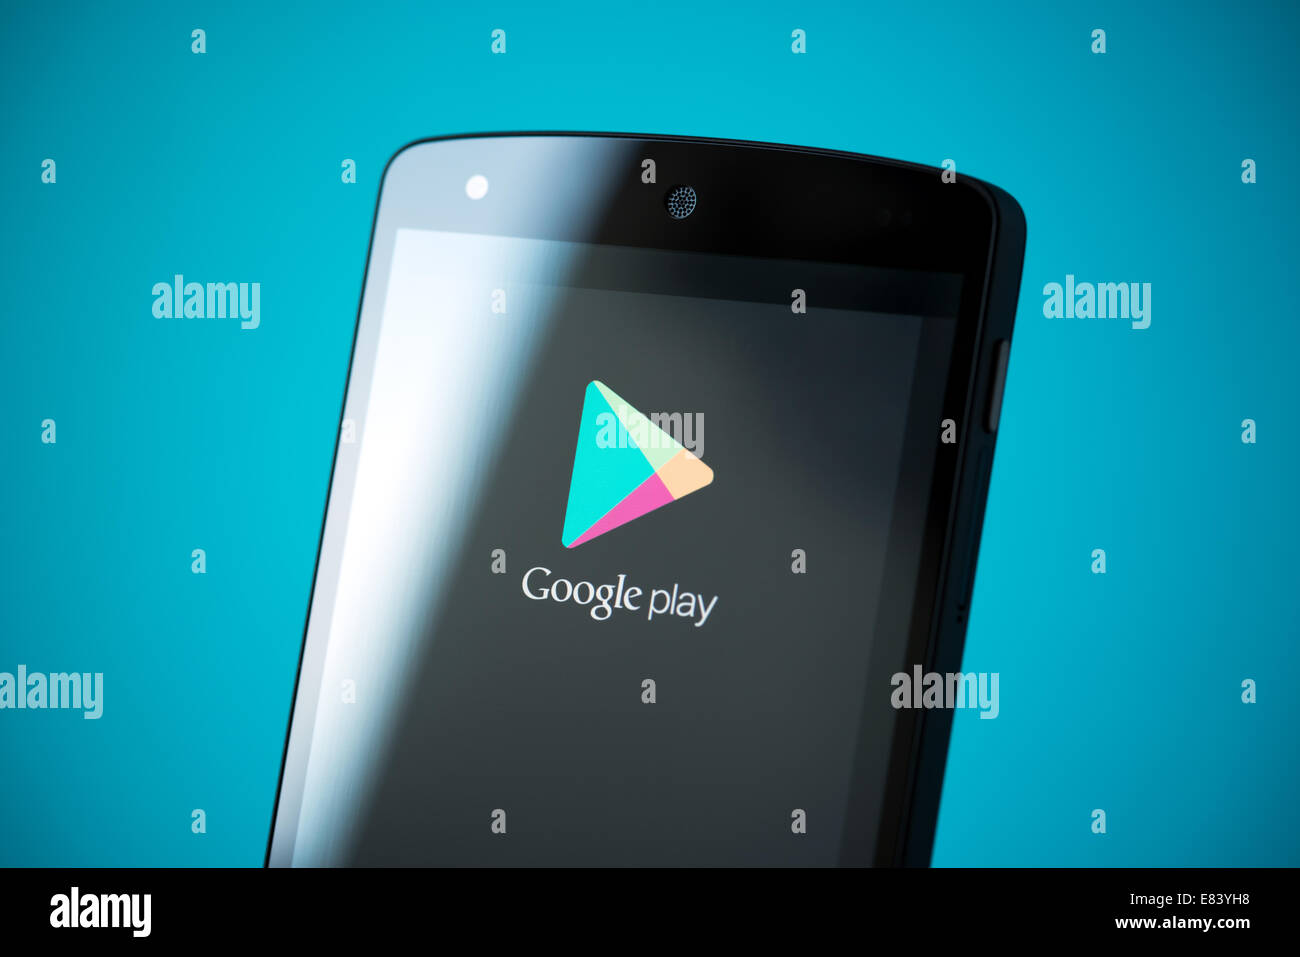 Close-up shot of brand new Google Nexus 5, powered by Android 4.4 version, with Google Play logotype on a screen. Stock Photo